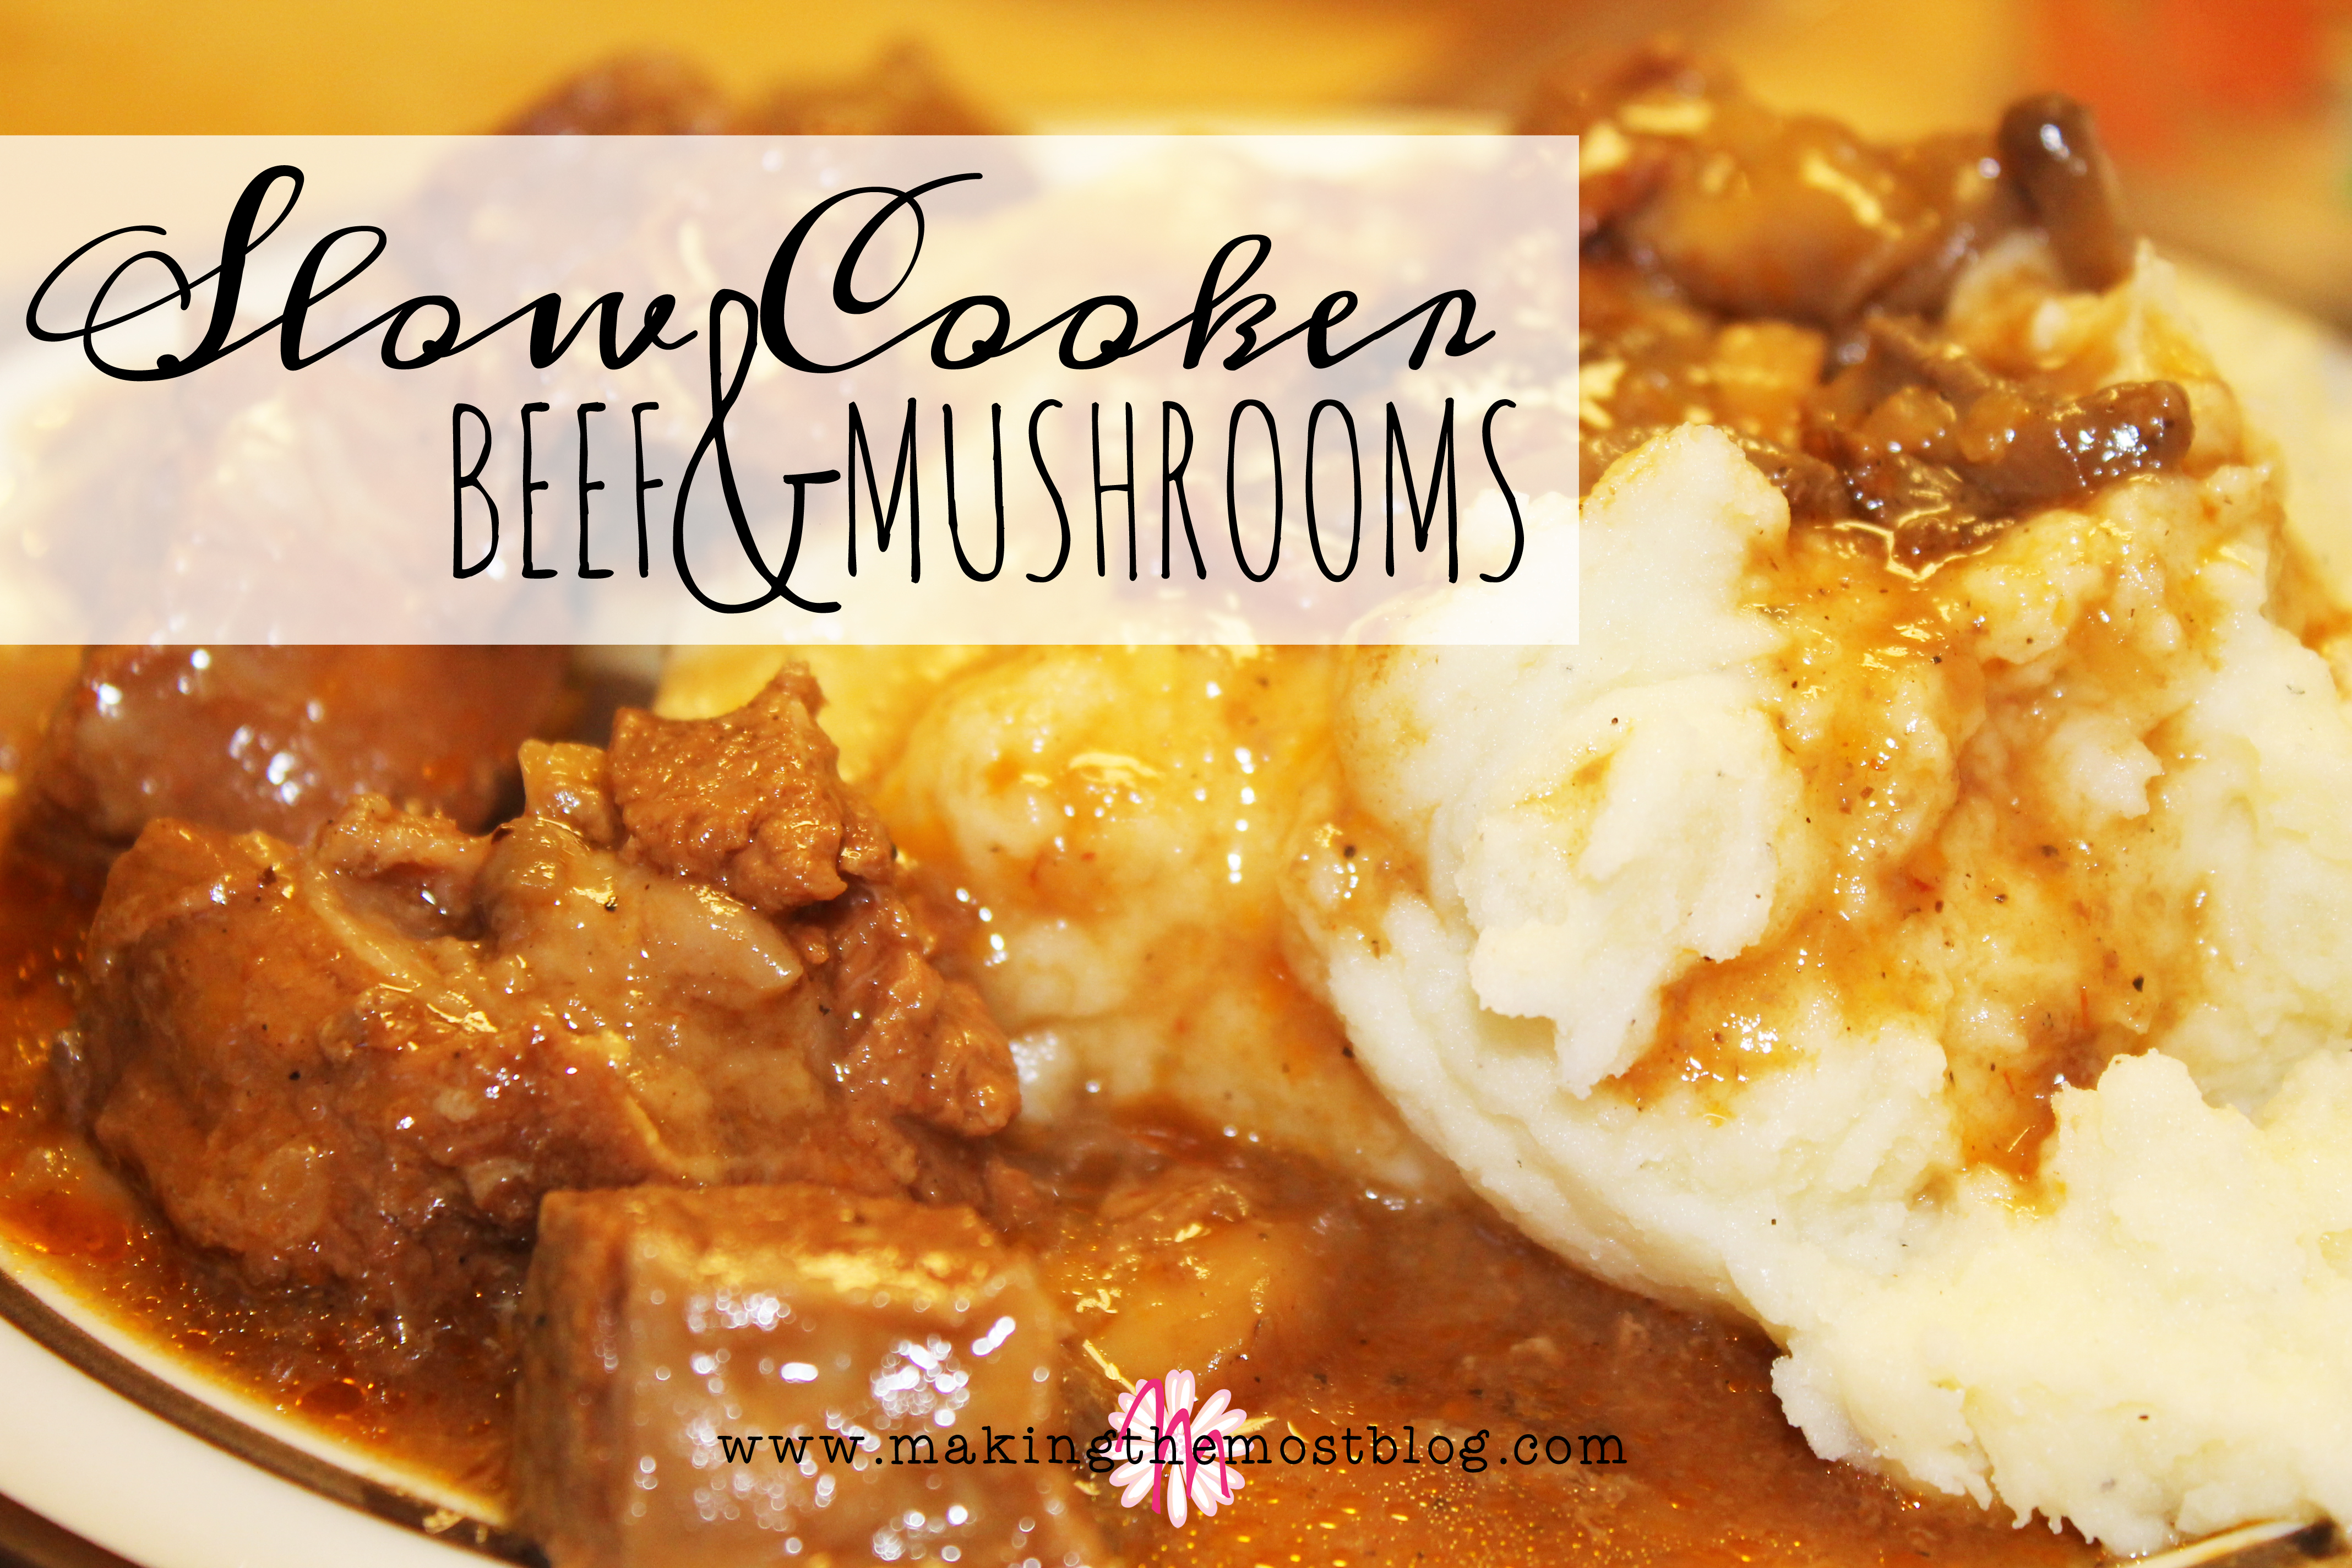 Slow Cooker Beef & Mushroom Recipe | Making the Most Blog